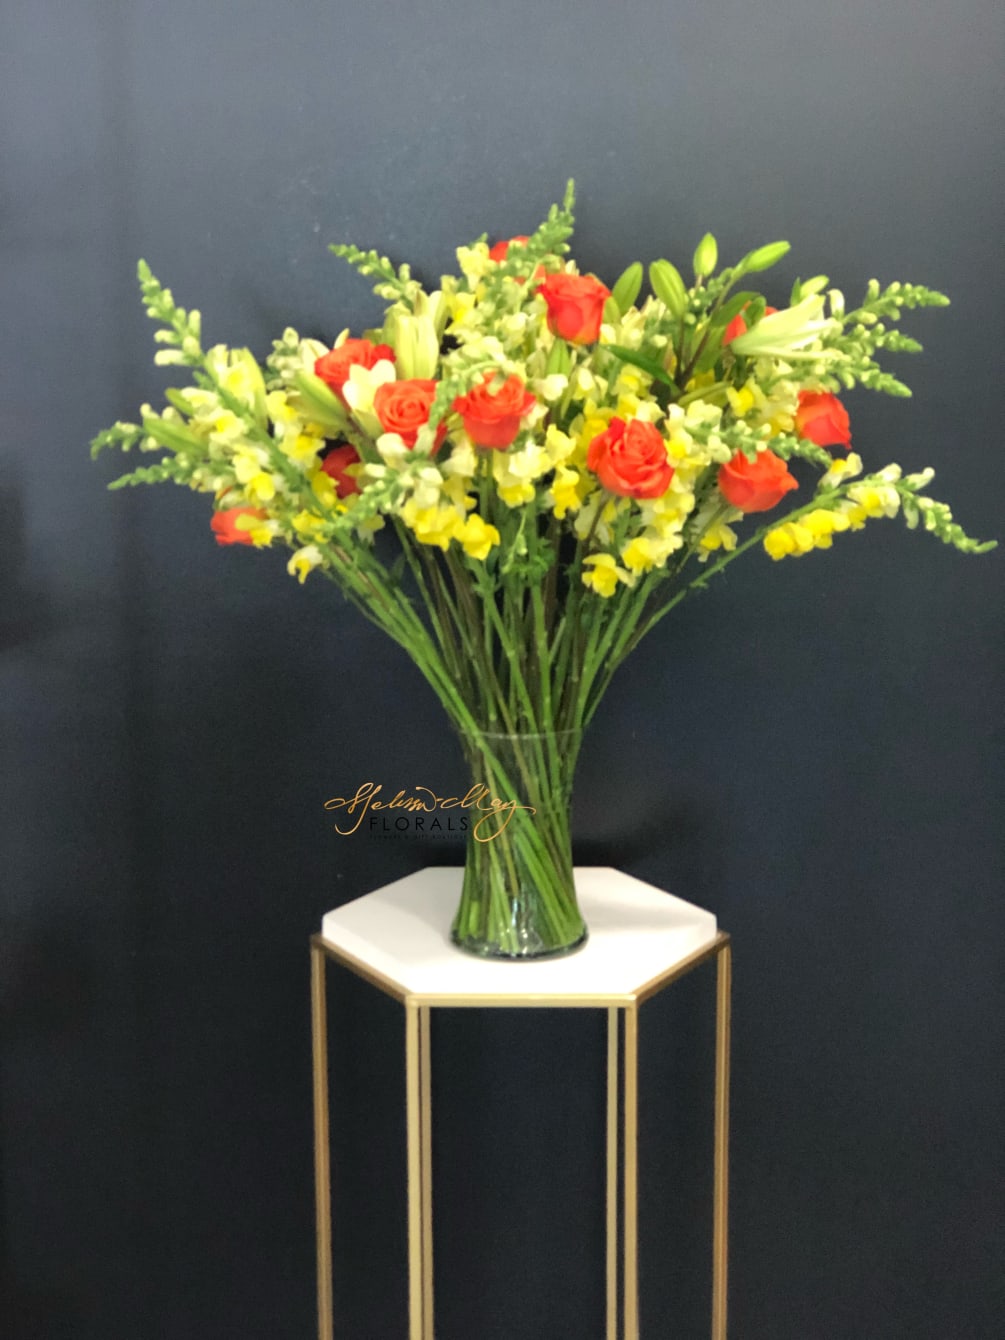 The brightest and sunniest arrangement you will ever find. Its nothing like